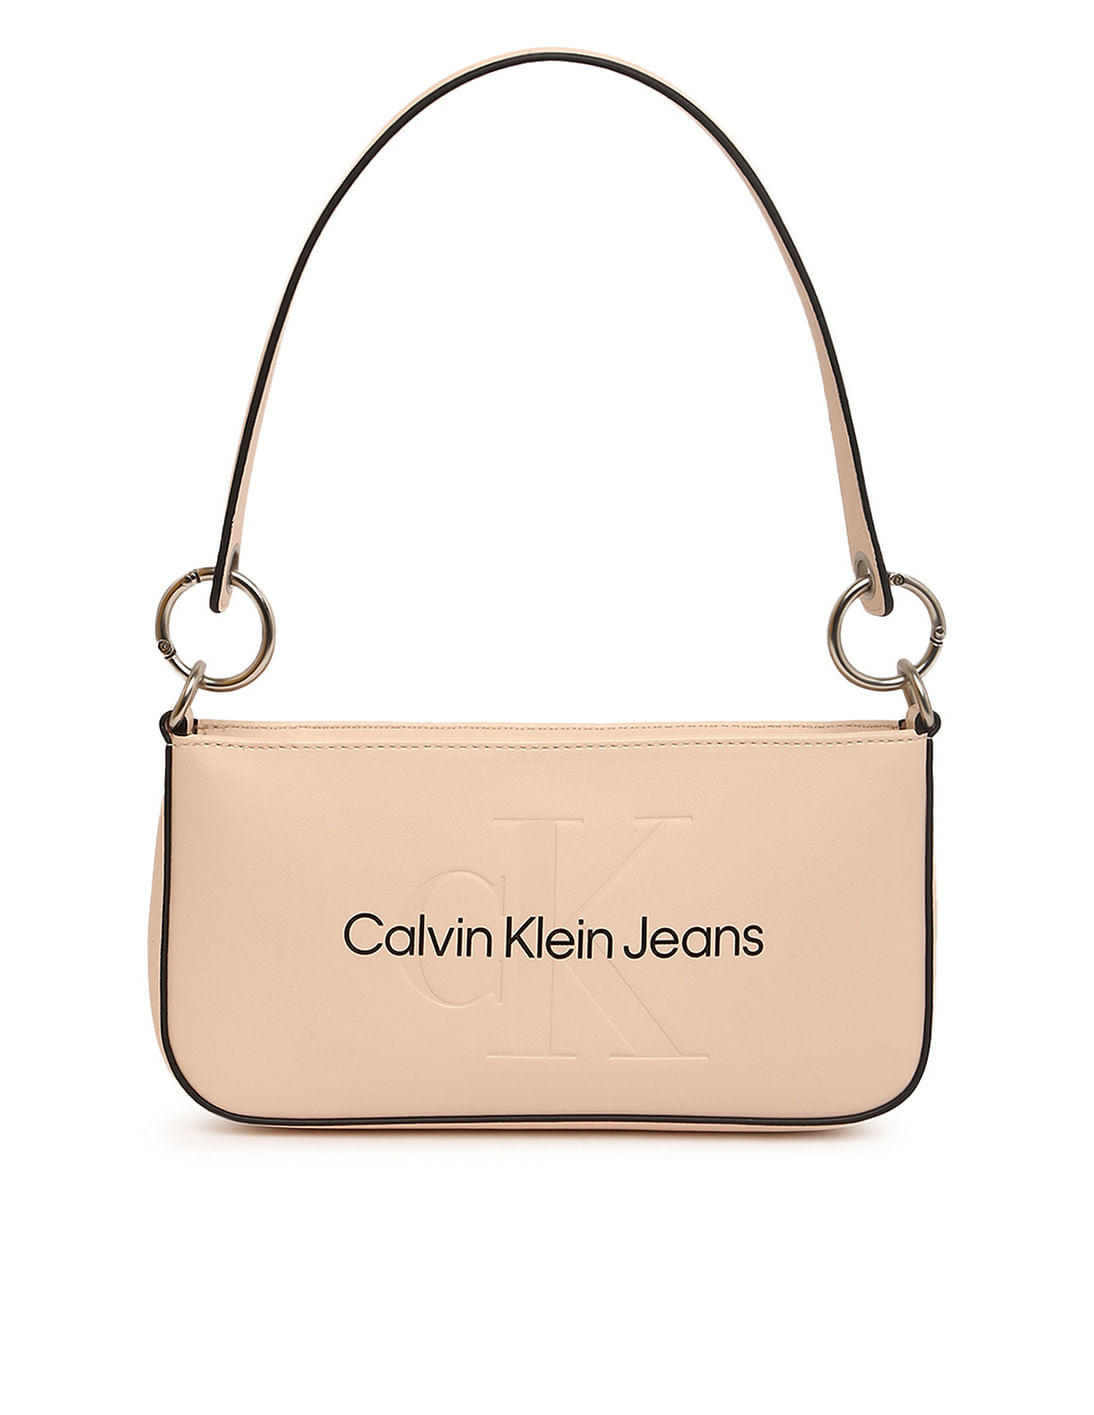 CALVIN KLEIN JEANS - Women's small padded shoulder bag with logo